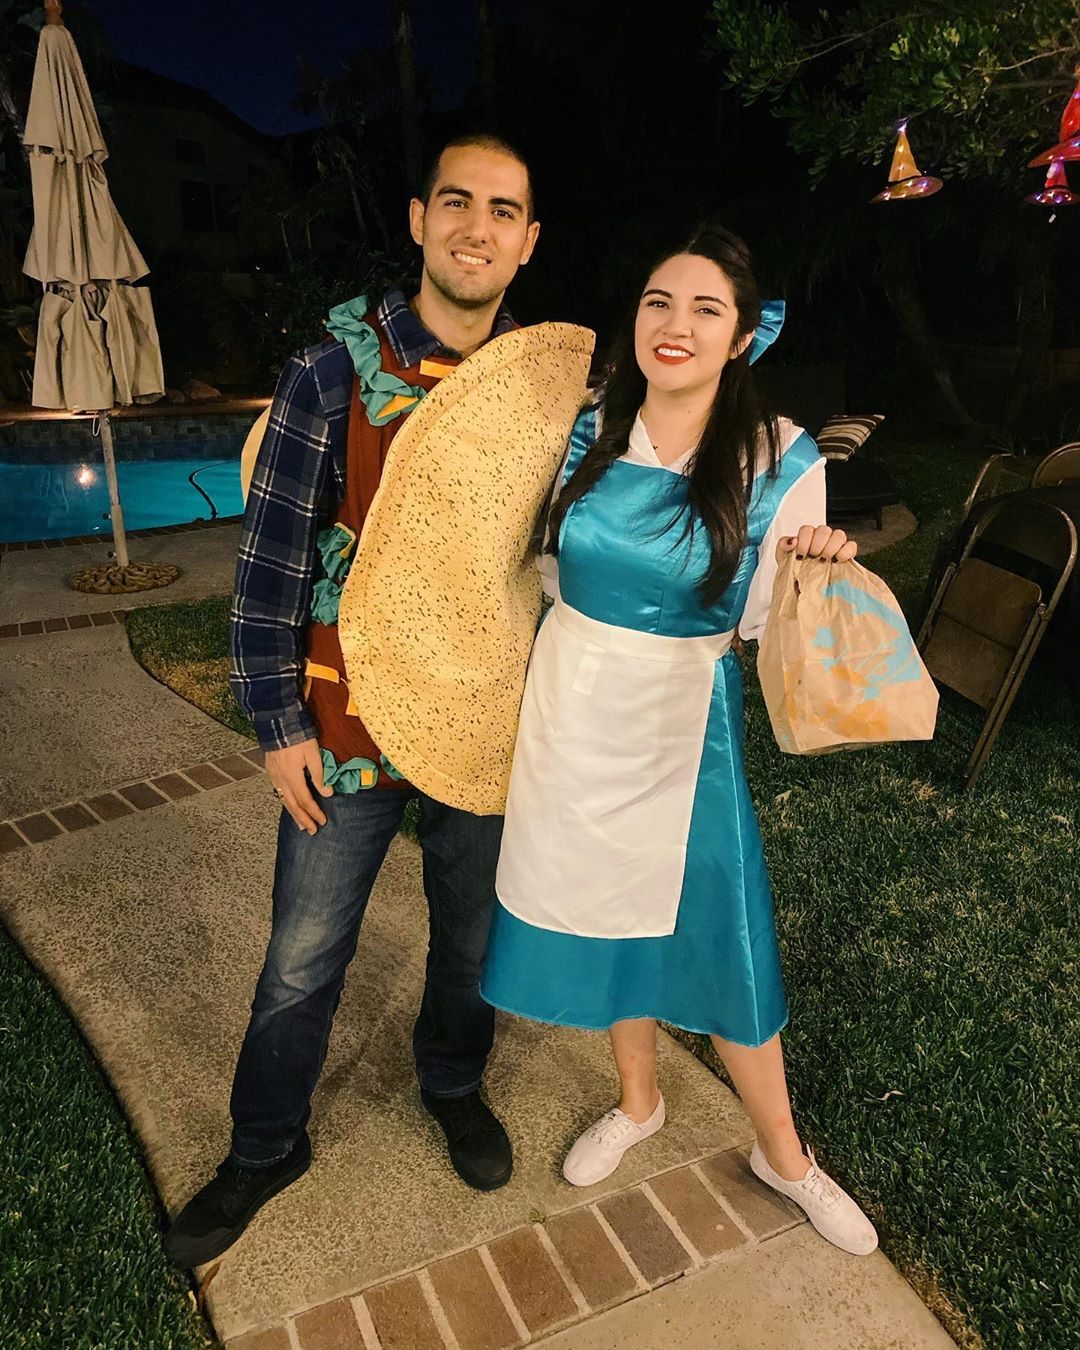 Punny Halloween Costumes You Should Try This Year | Reader's Digest